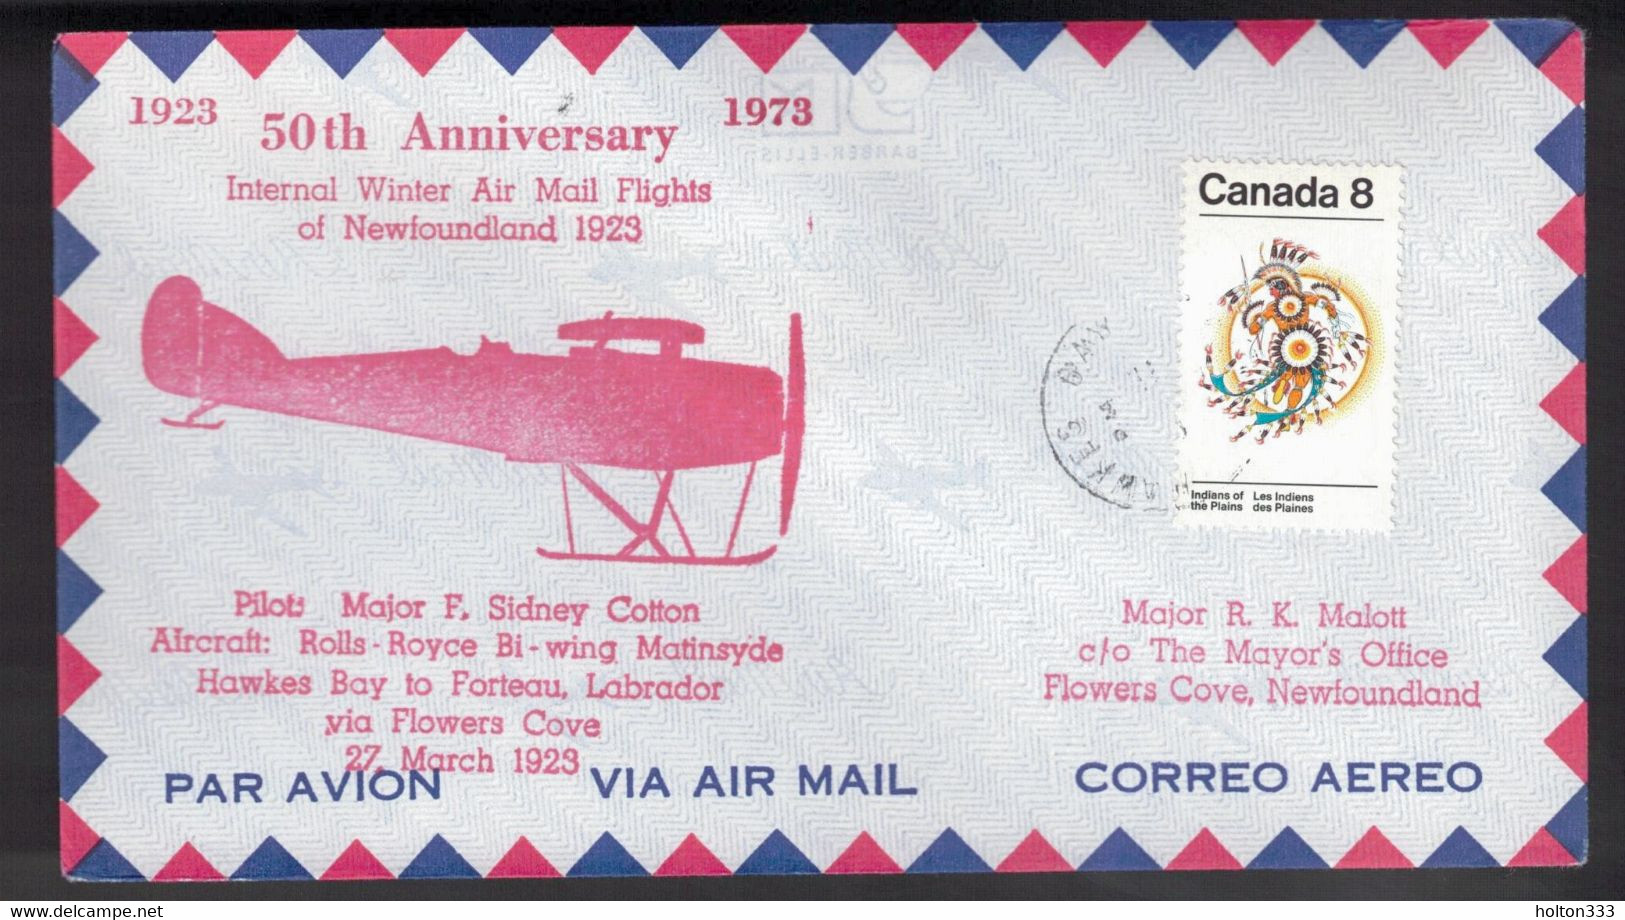 CANADA 50th Anniversary -  Newfoundland Flight From Hawkes Bay To Flowers Cove - Commemorative Covers